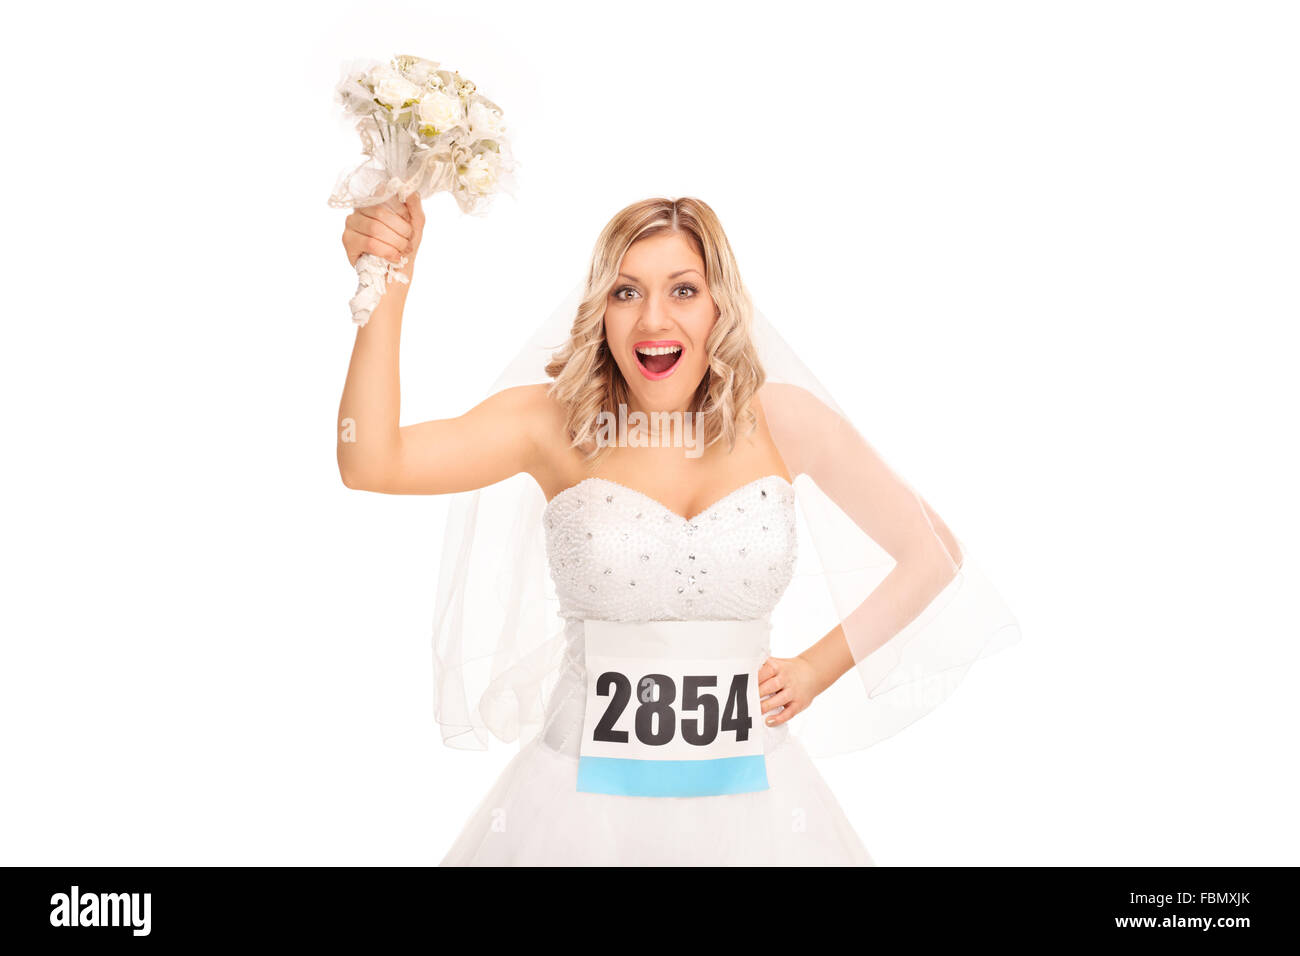 Studio shot of a young bride with a race number holding a wedding flower isolated on white background Stock Photo